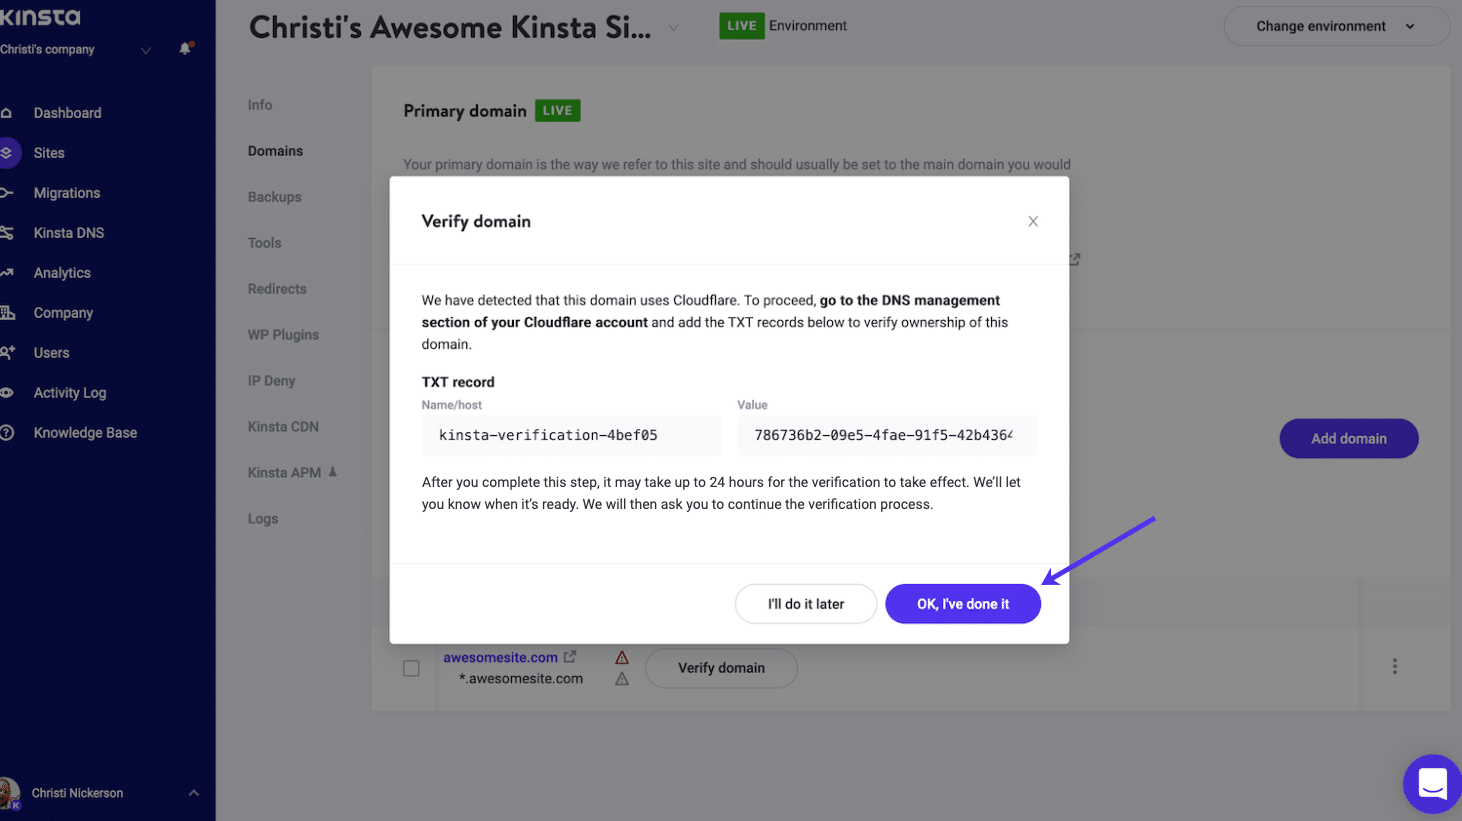 Click the OK, I’ve done it button in MyKinsta for the first TXT record to verify your domain.